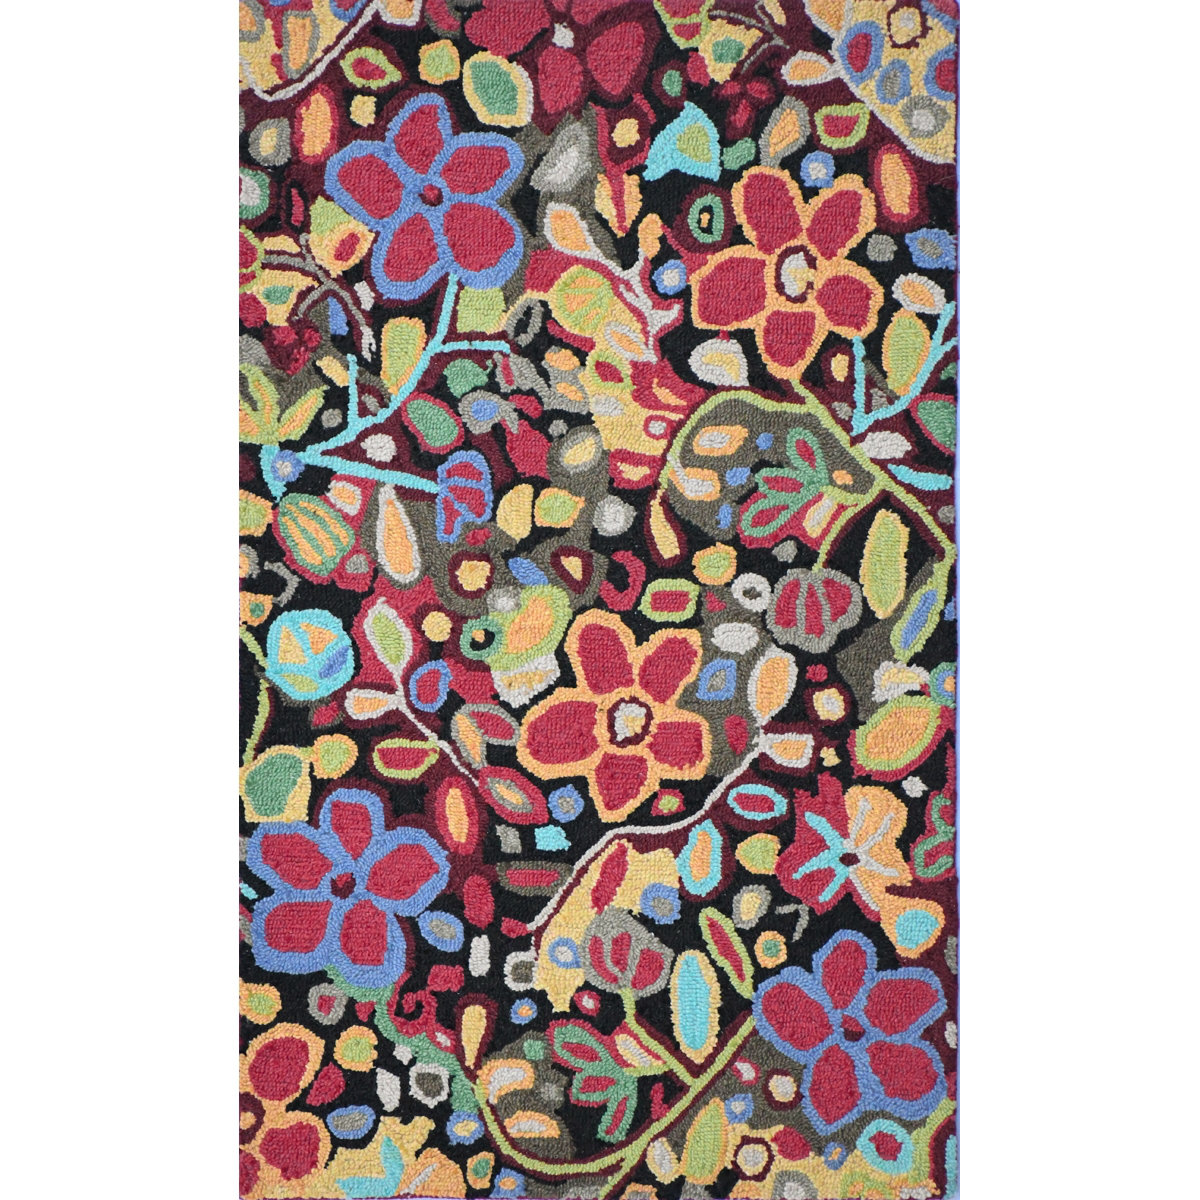 CompanyC Wendy's Bouquet Hand Hooked Wool Rug in Black/Red/Yellow